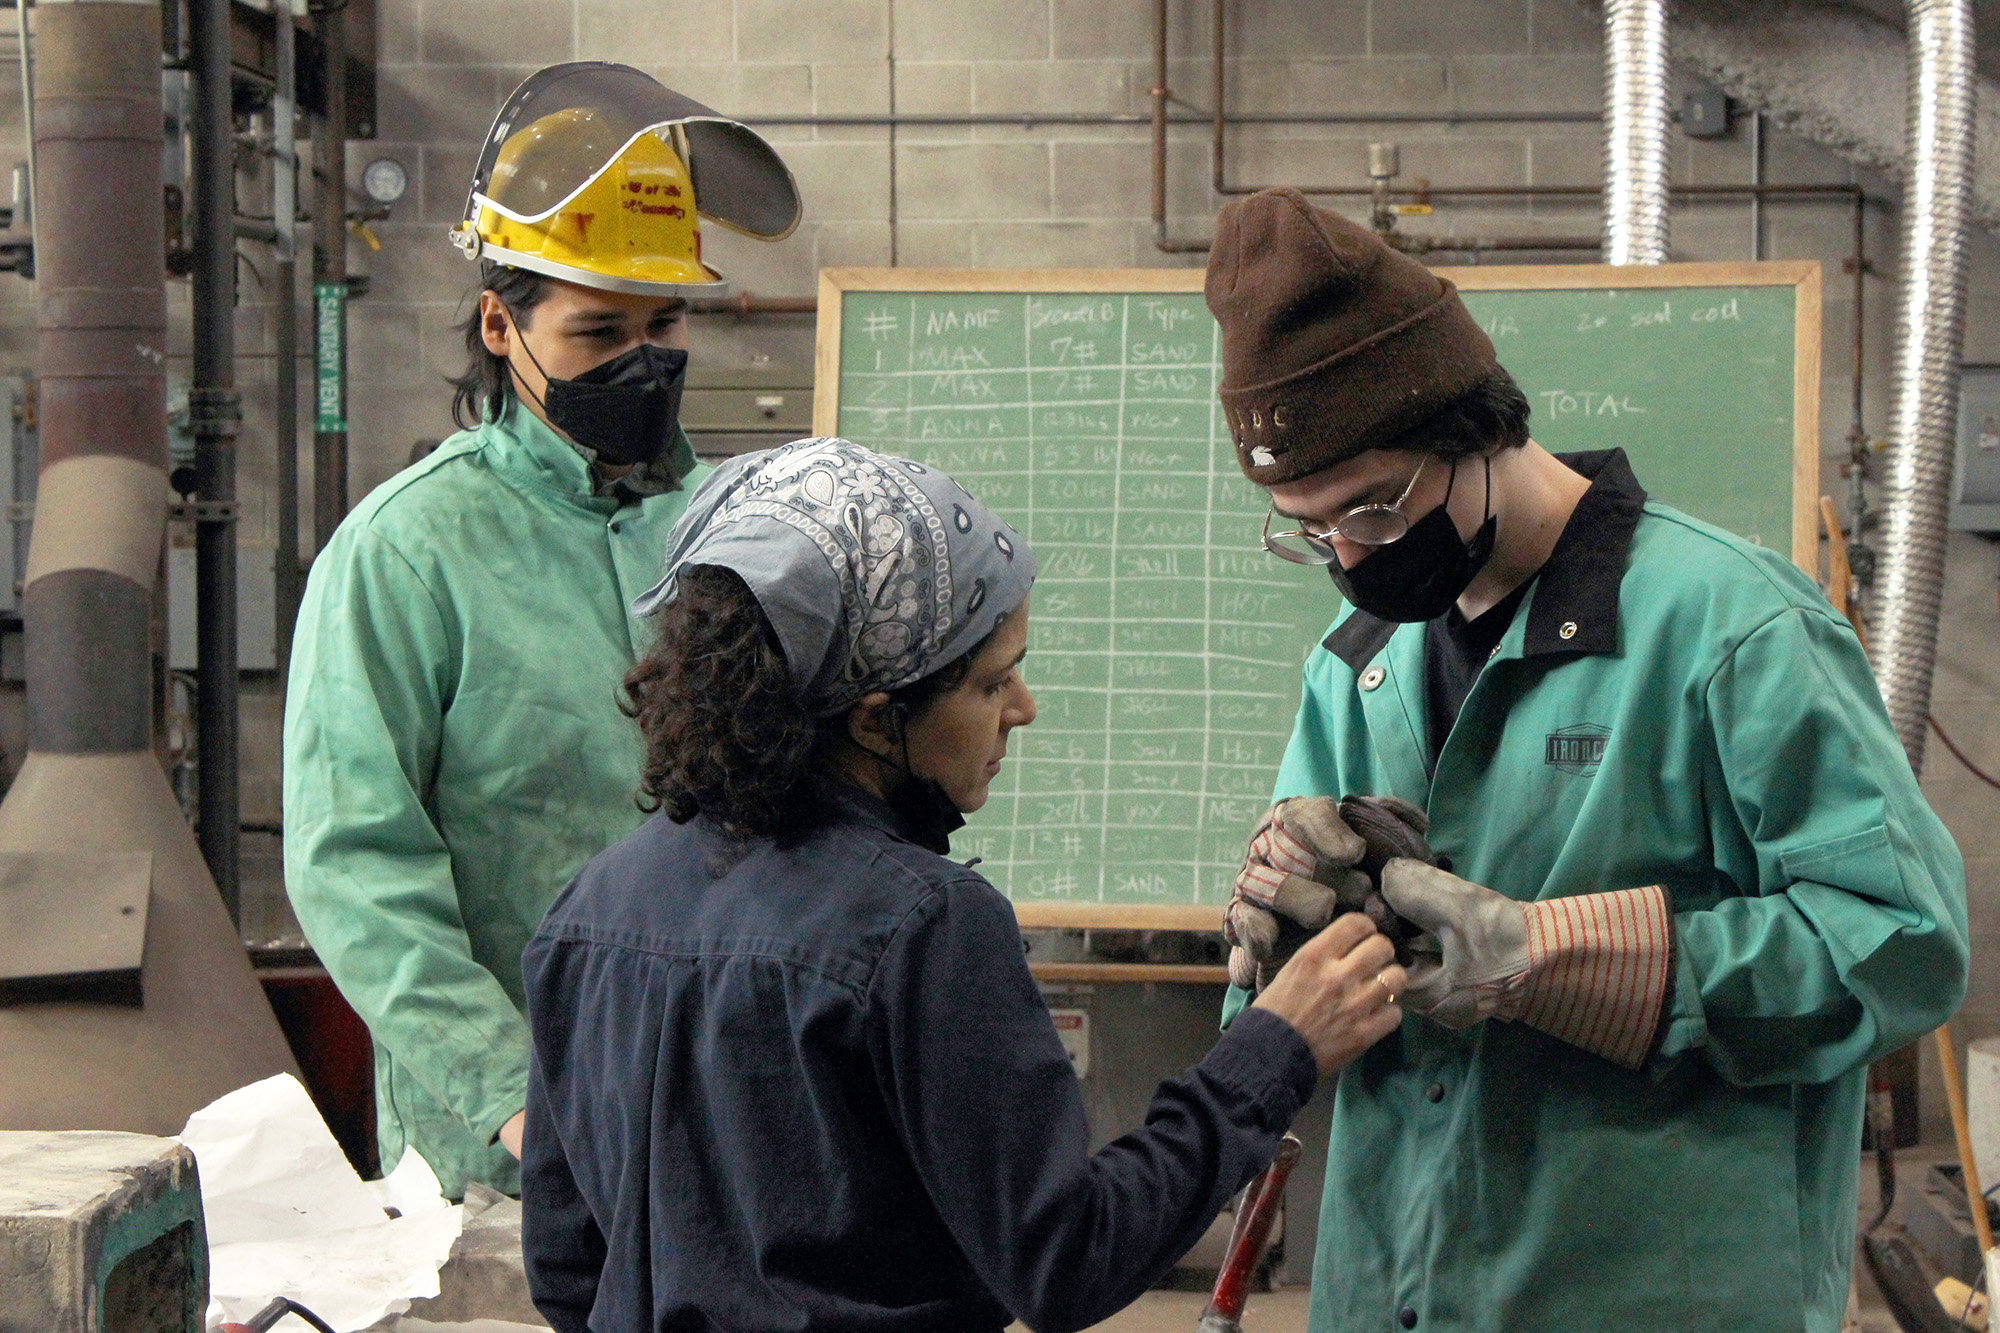 Assistant Professor Rotem Tamir inspects a student's bronze work while another looks on